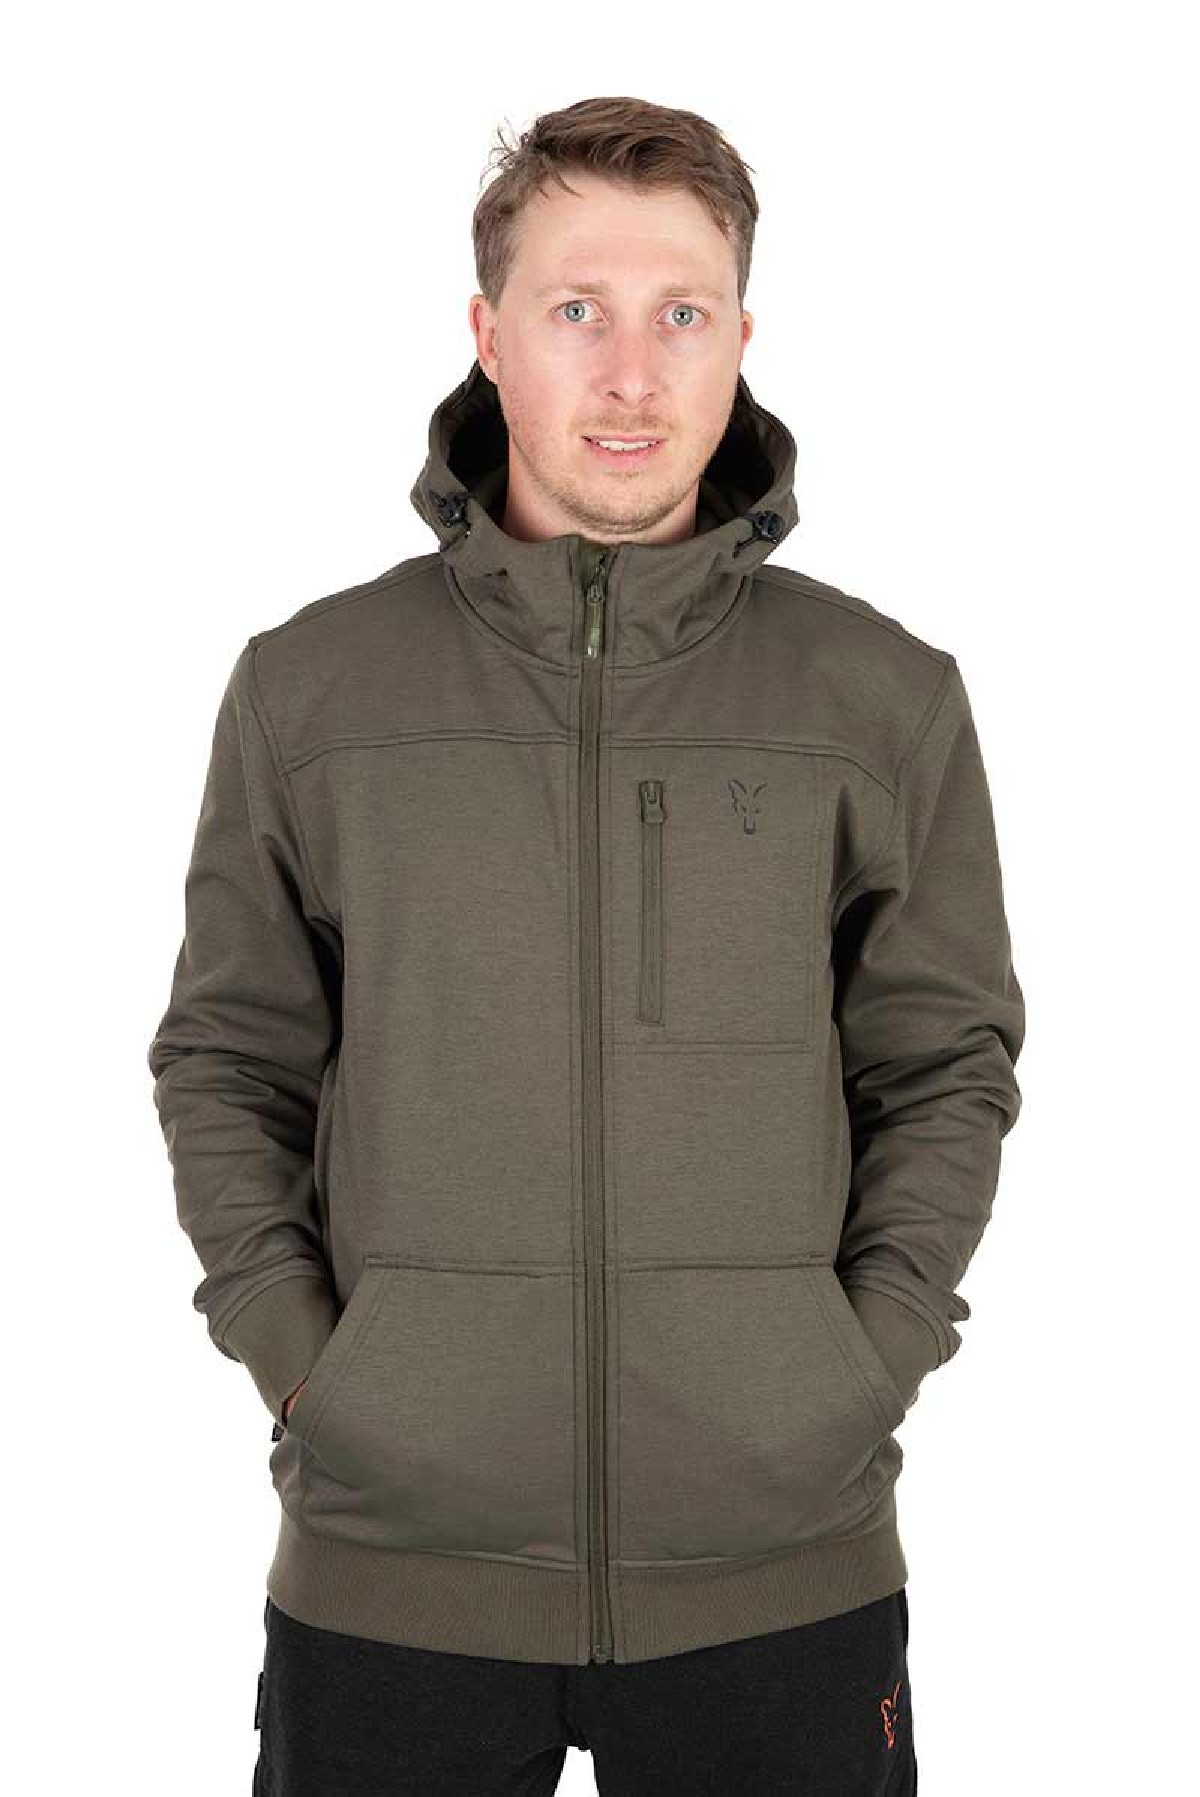 Fox Collection Soft Shell Jacket Green & Black Large